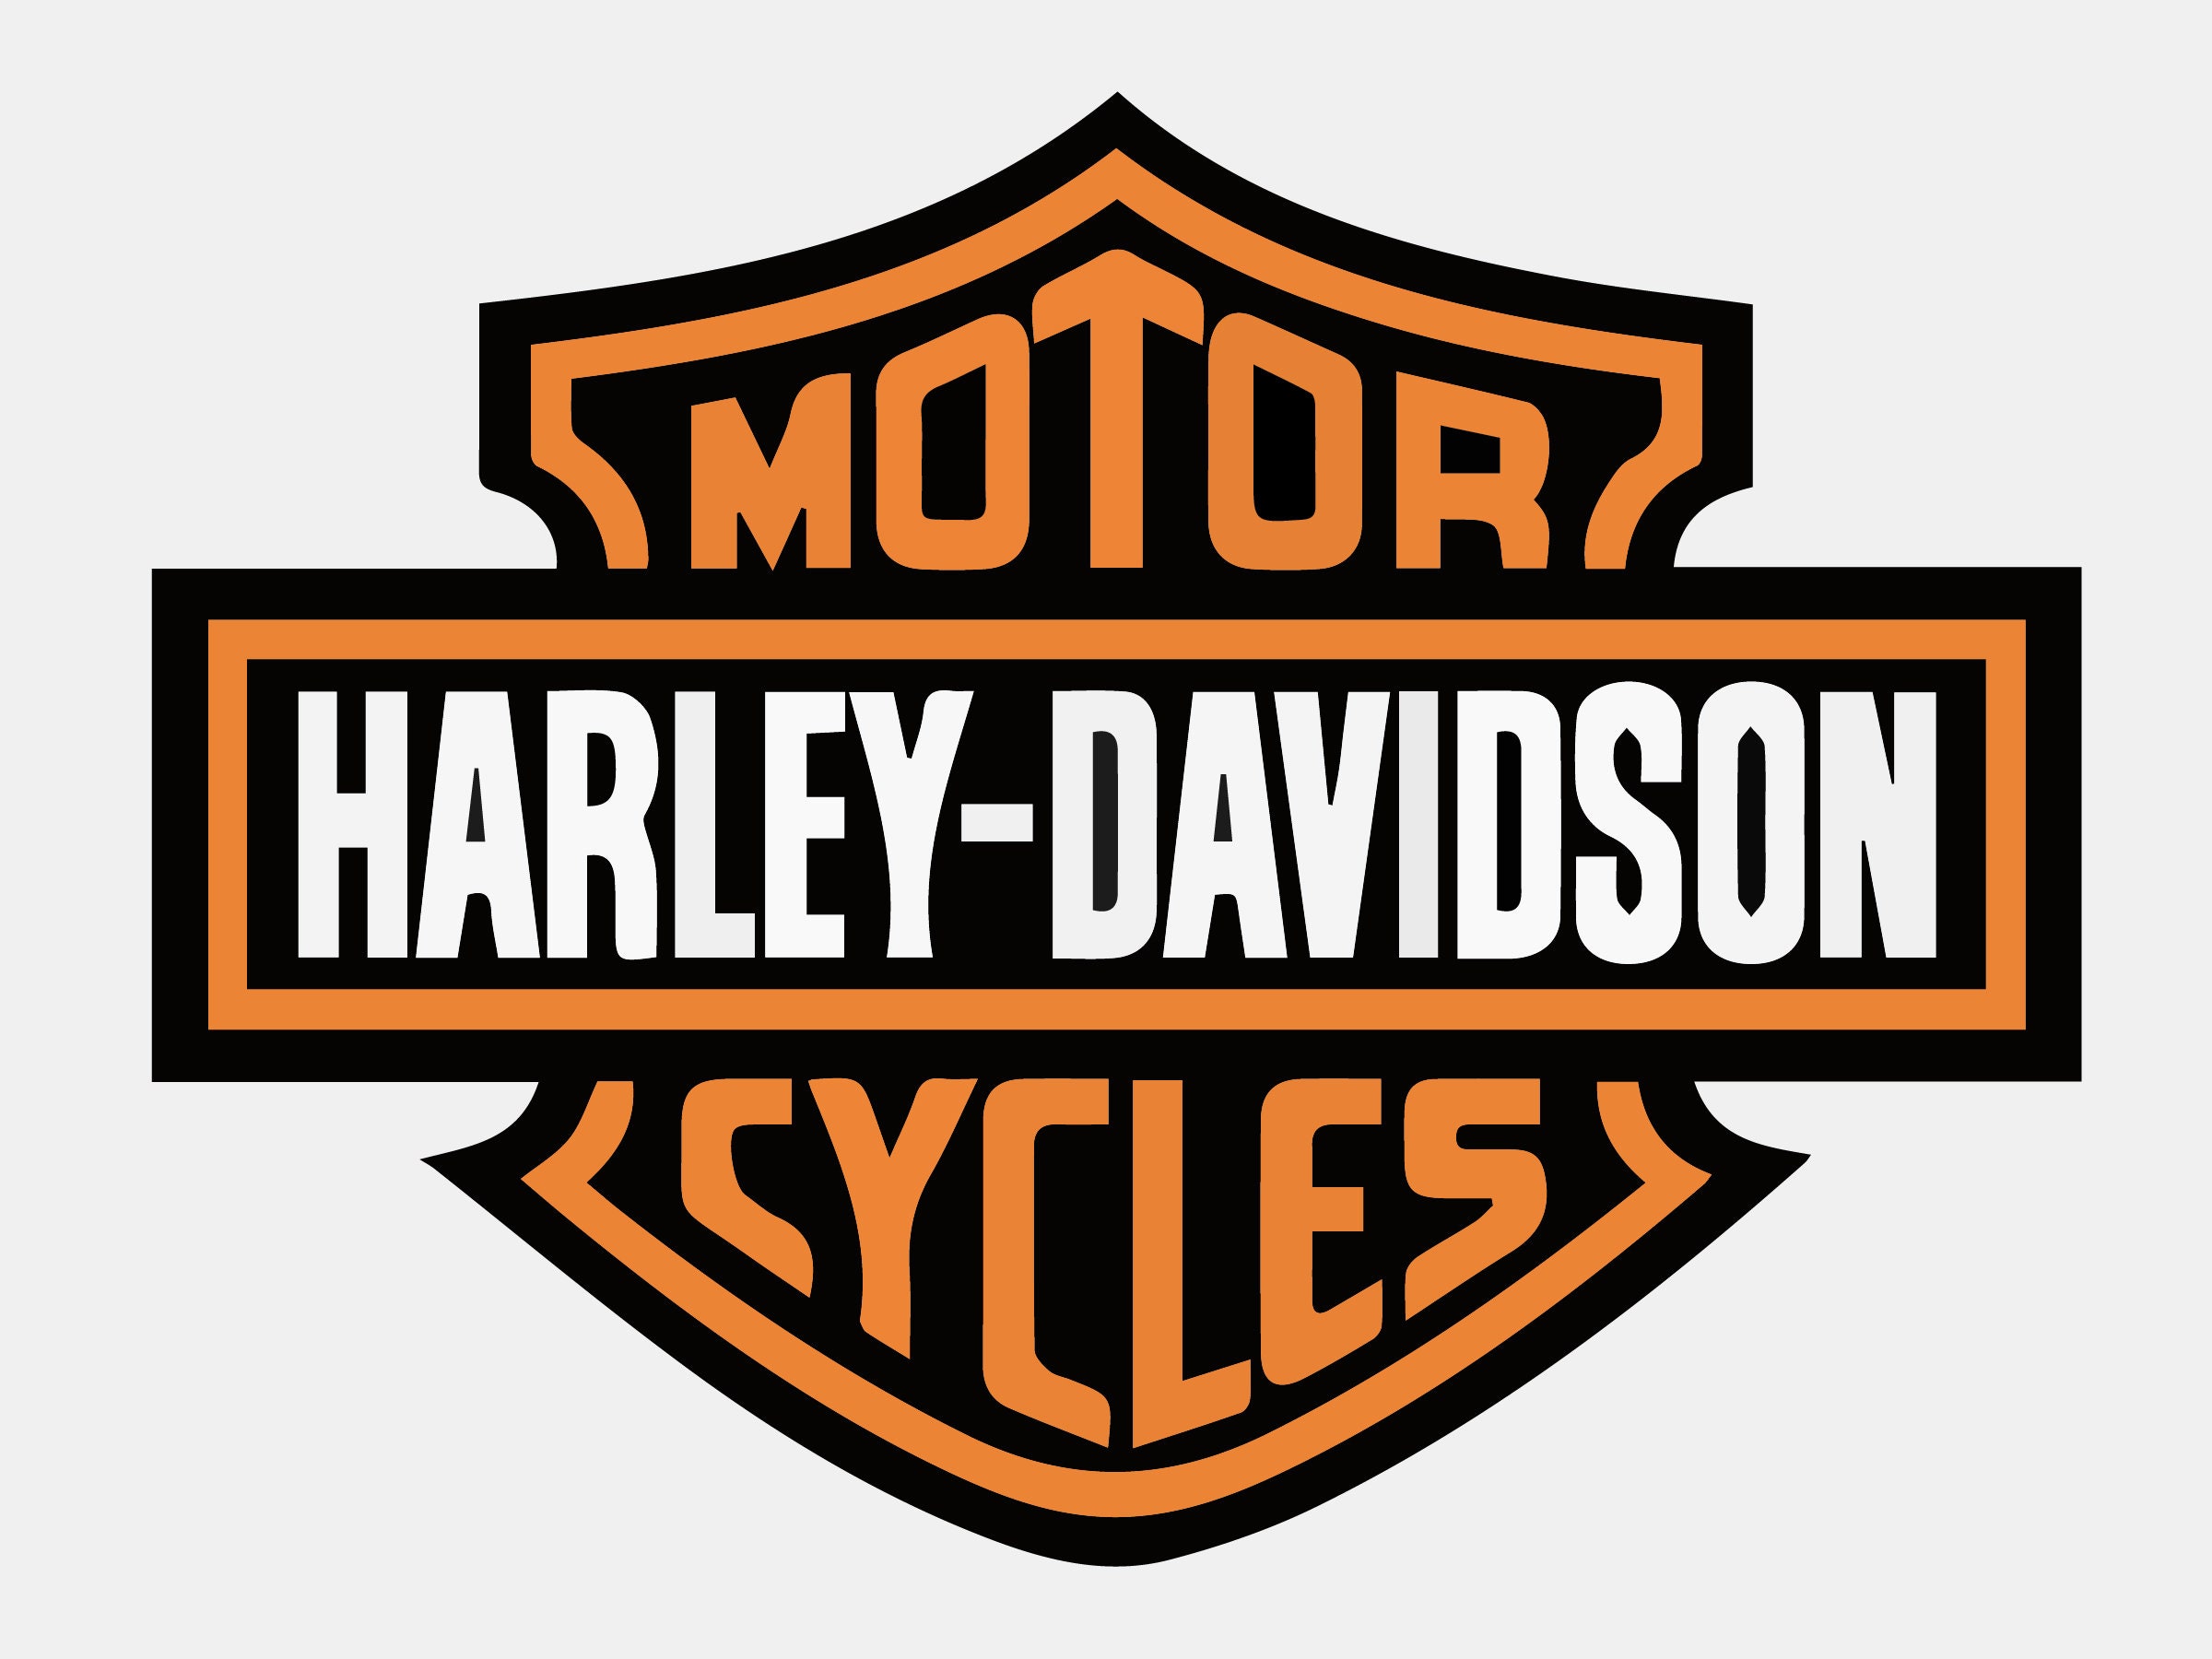 Harley Davidson SVG Harley Davidson Harley Davidson PNG - Etsy